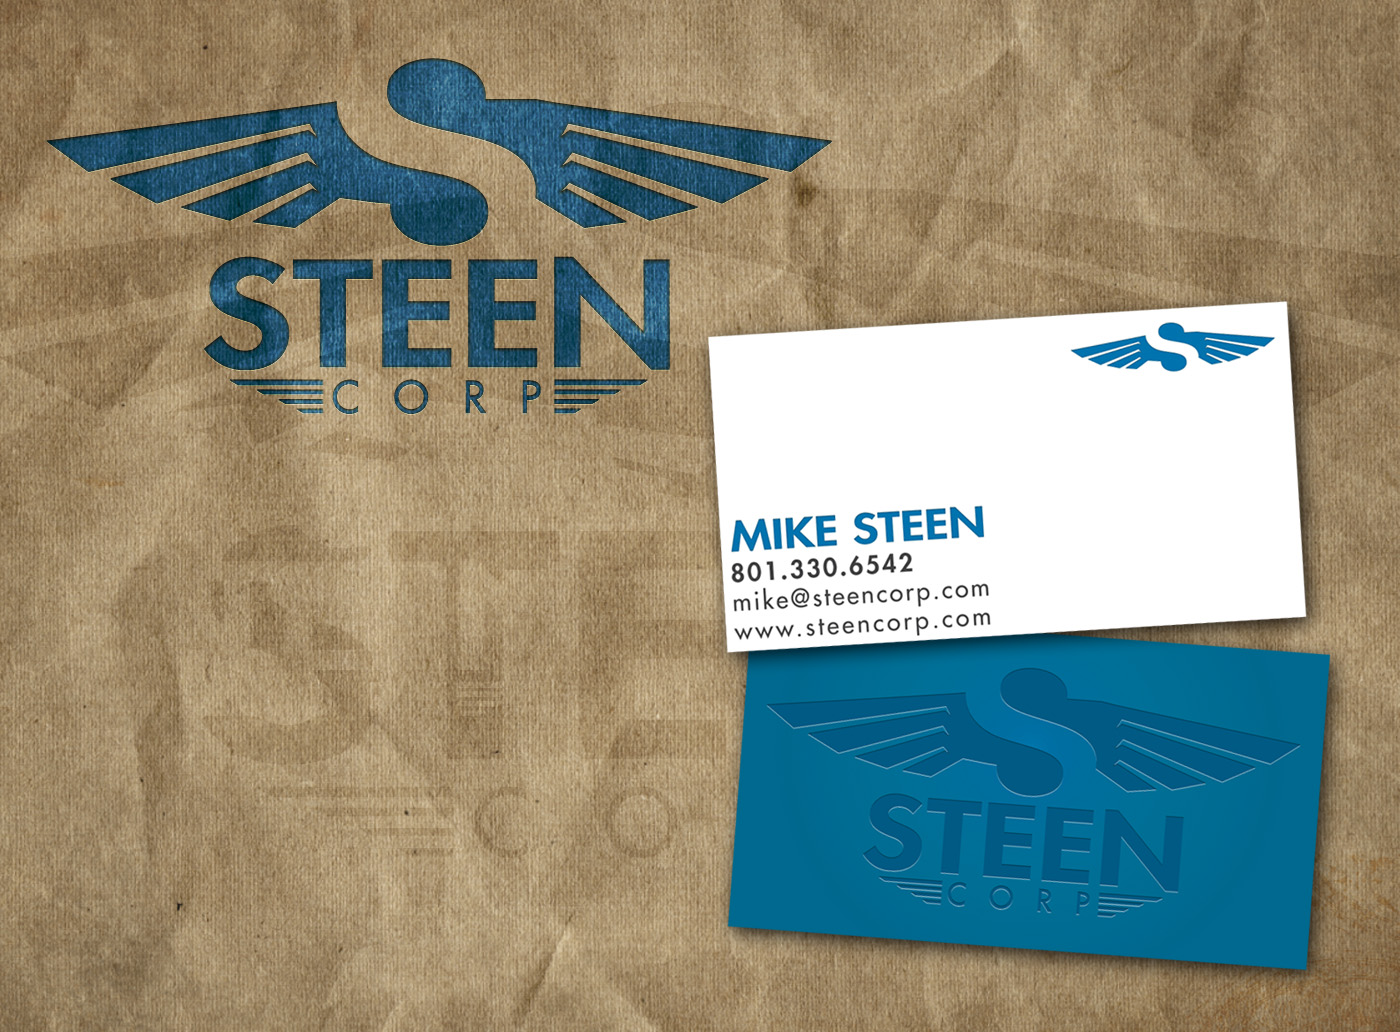 Steen Corp Logo Treatment and cards.jpg